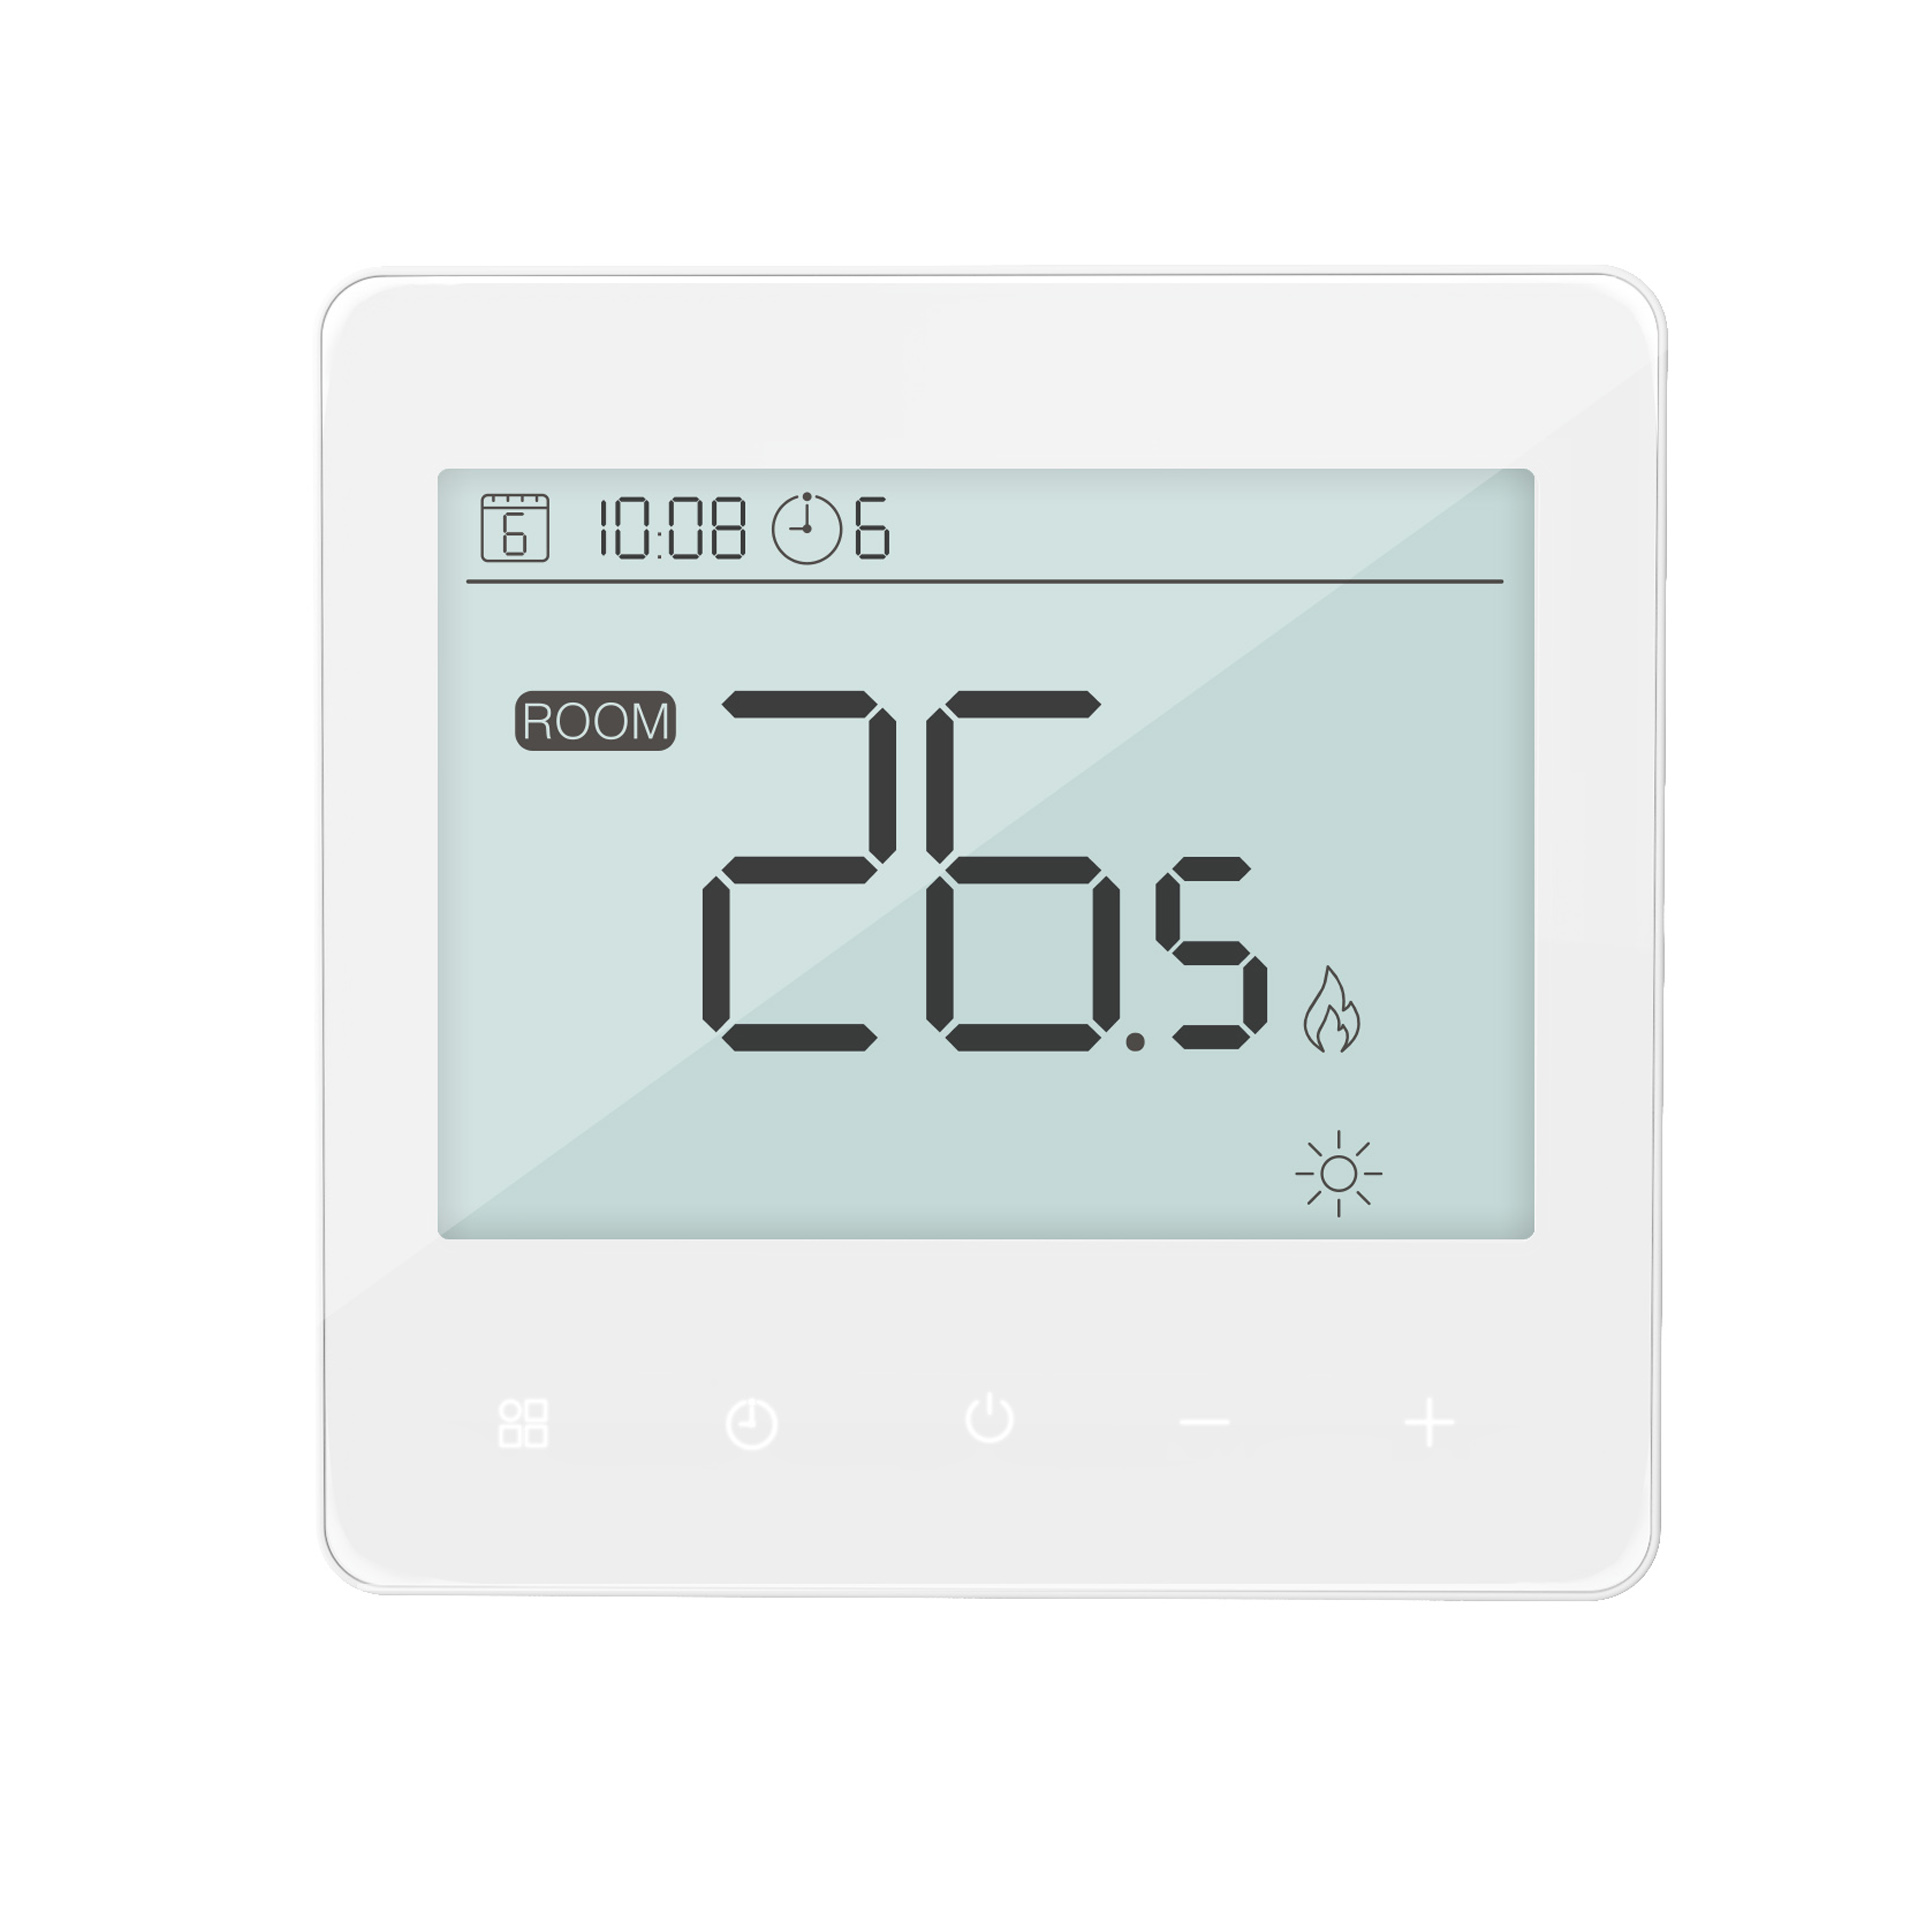 New 16A Electric Heating Programmable Smart WiFi Thermostat